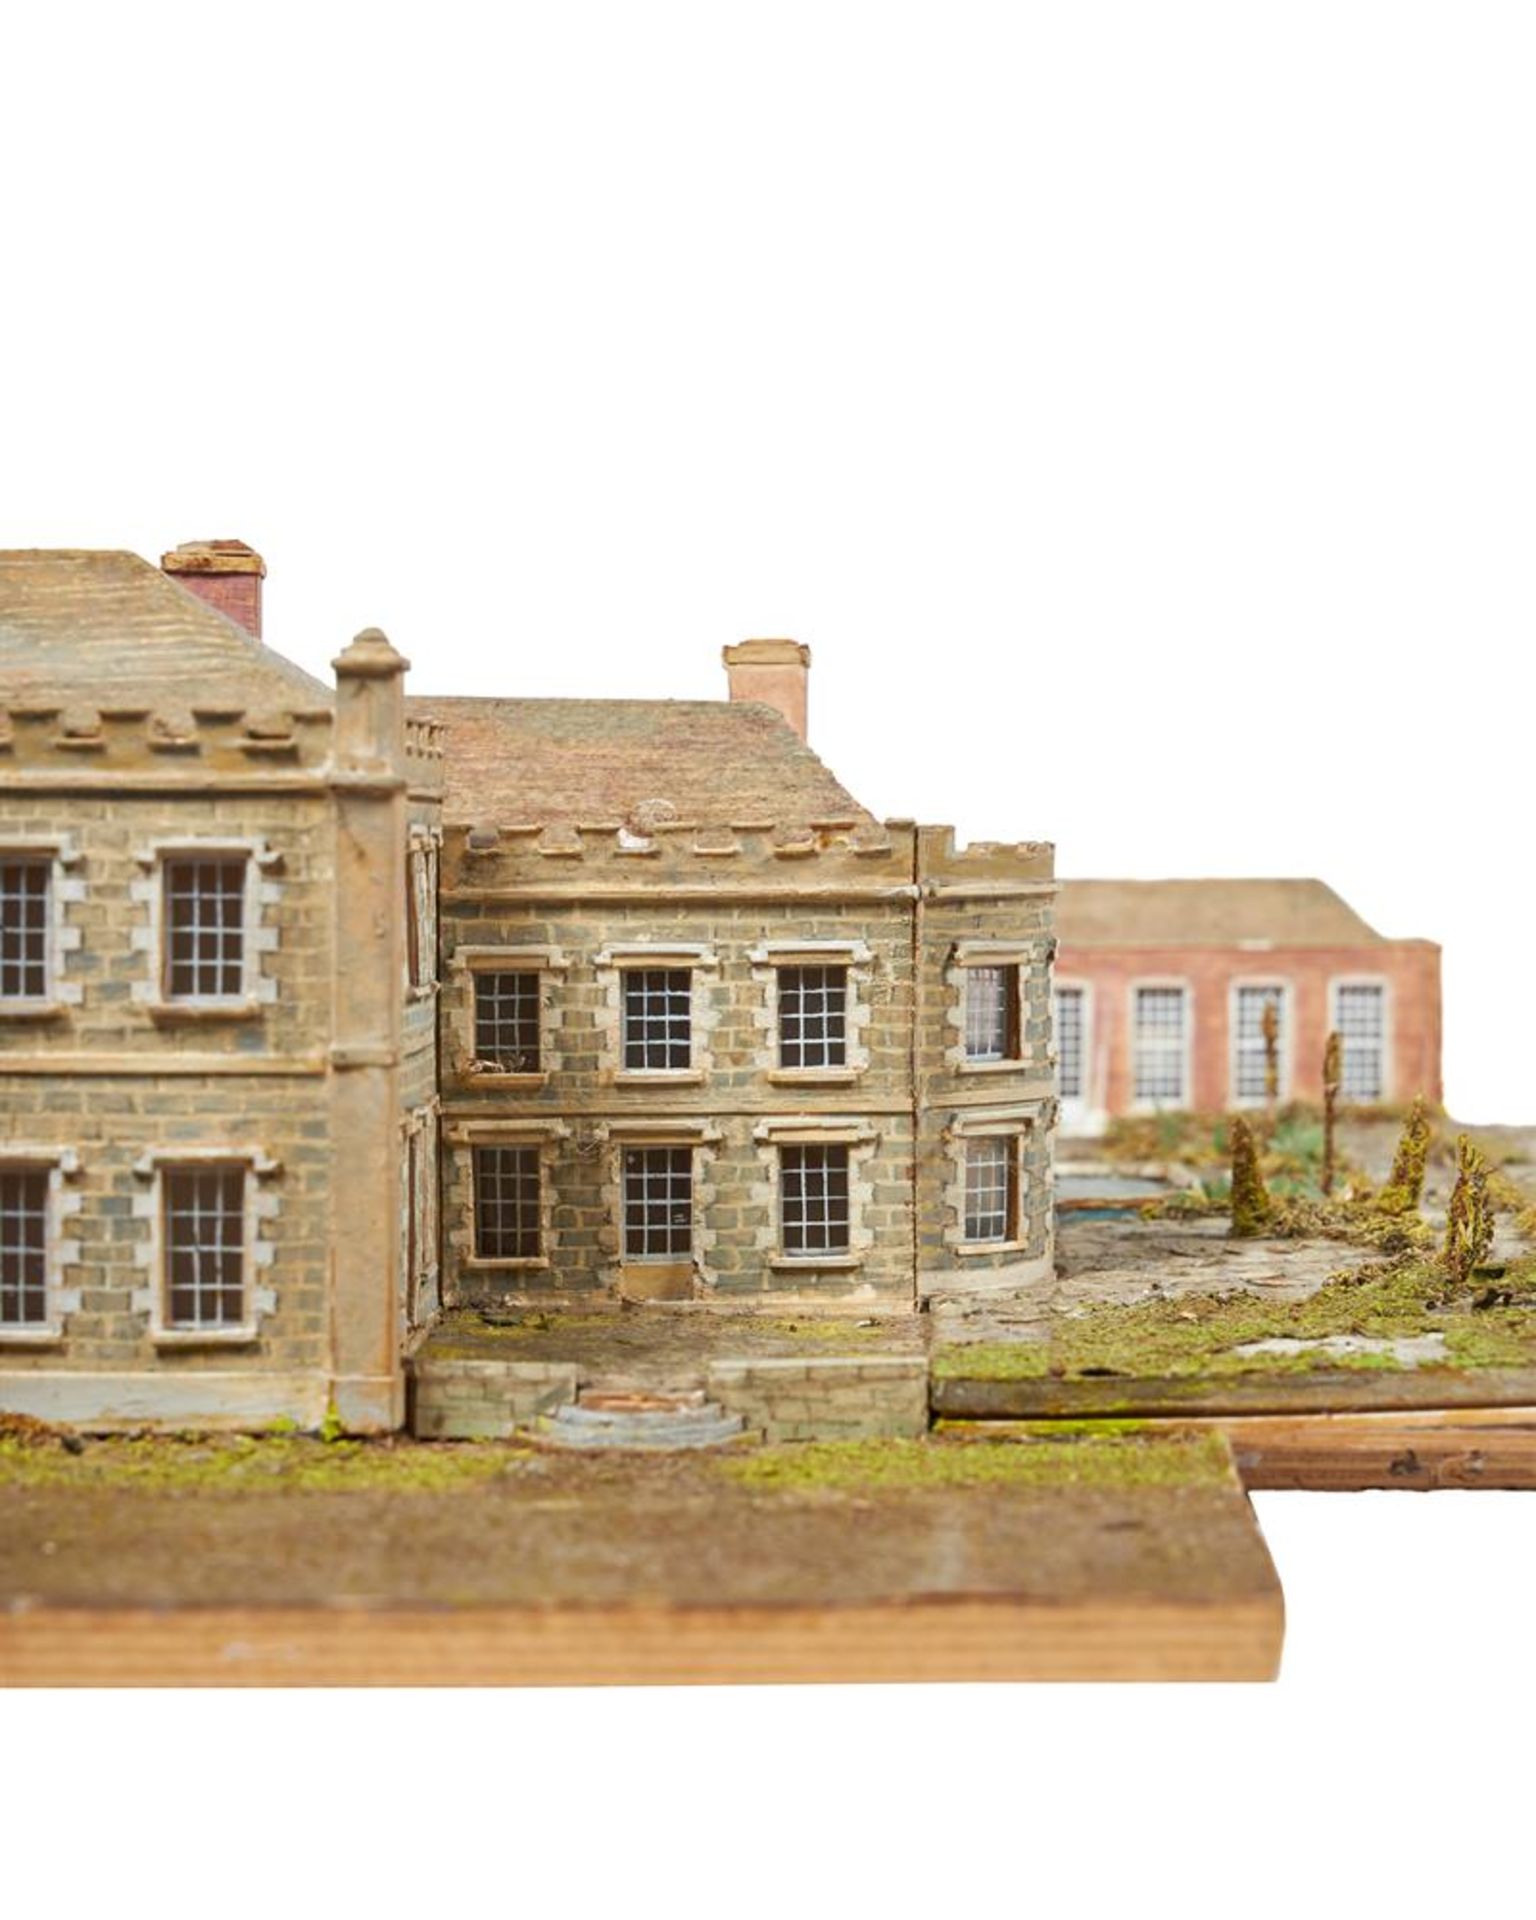 AN ARCHITECTURAL MODEL OF FLAXLEY ABBEY, BY OLIVER MESSEL - Image 29 of 34